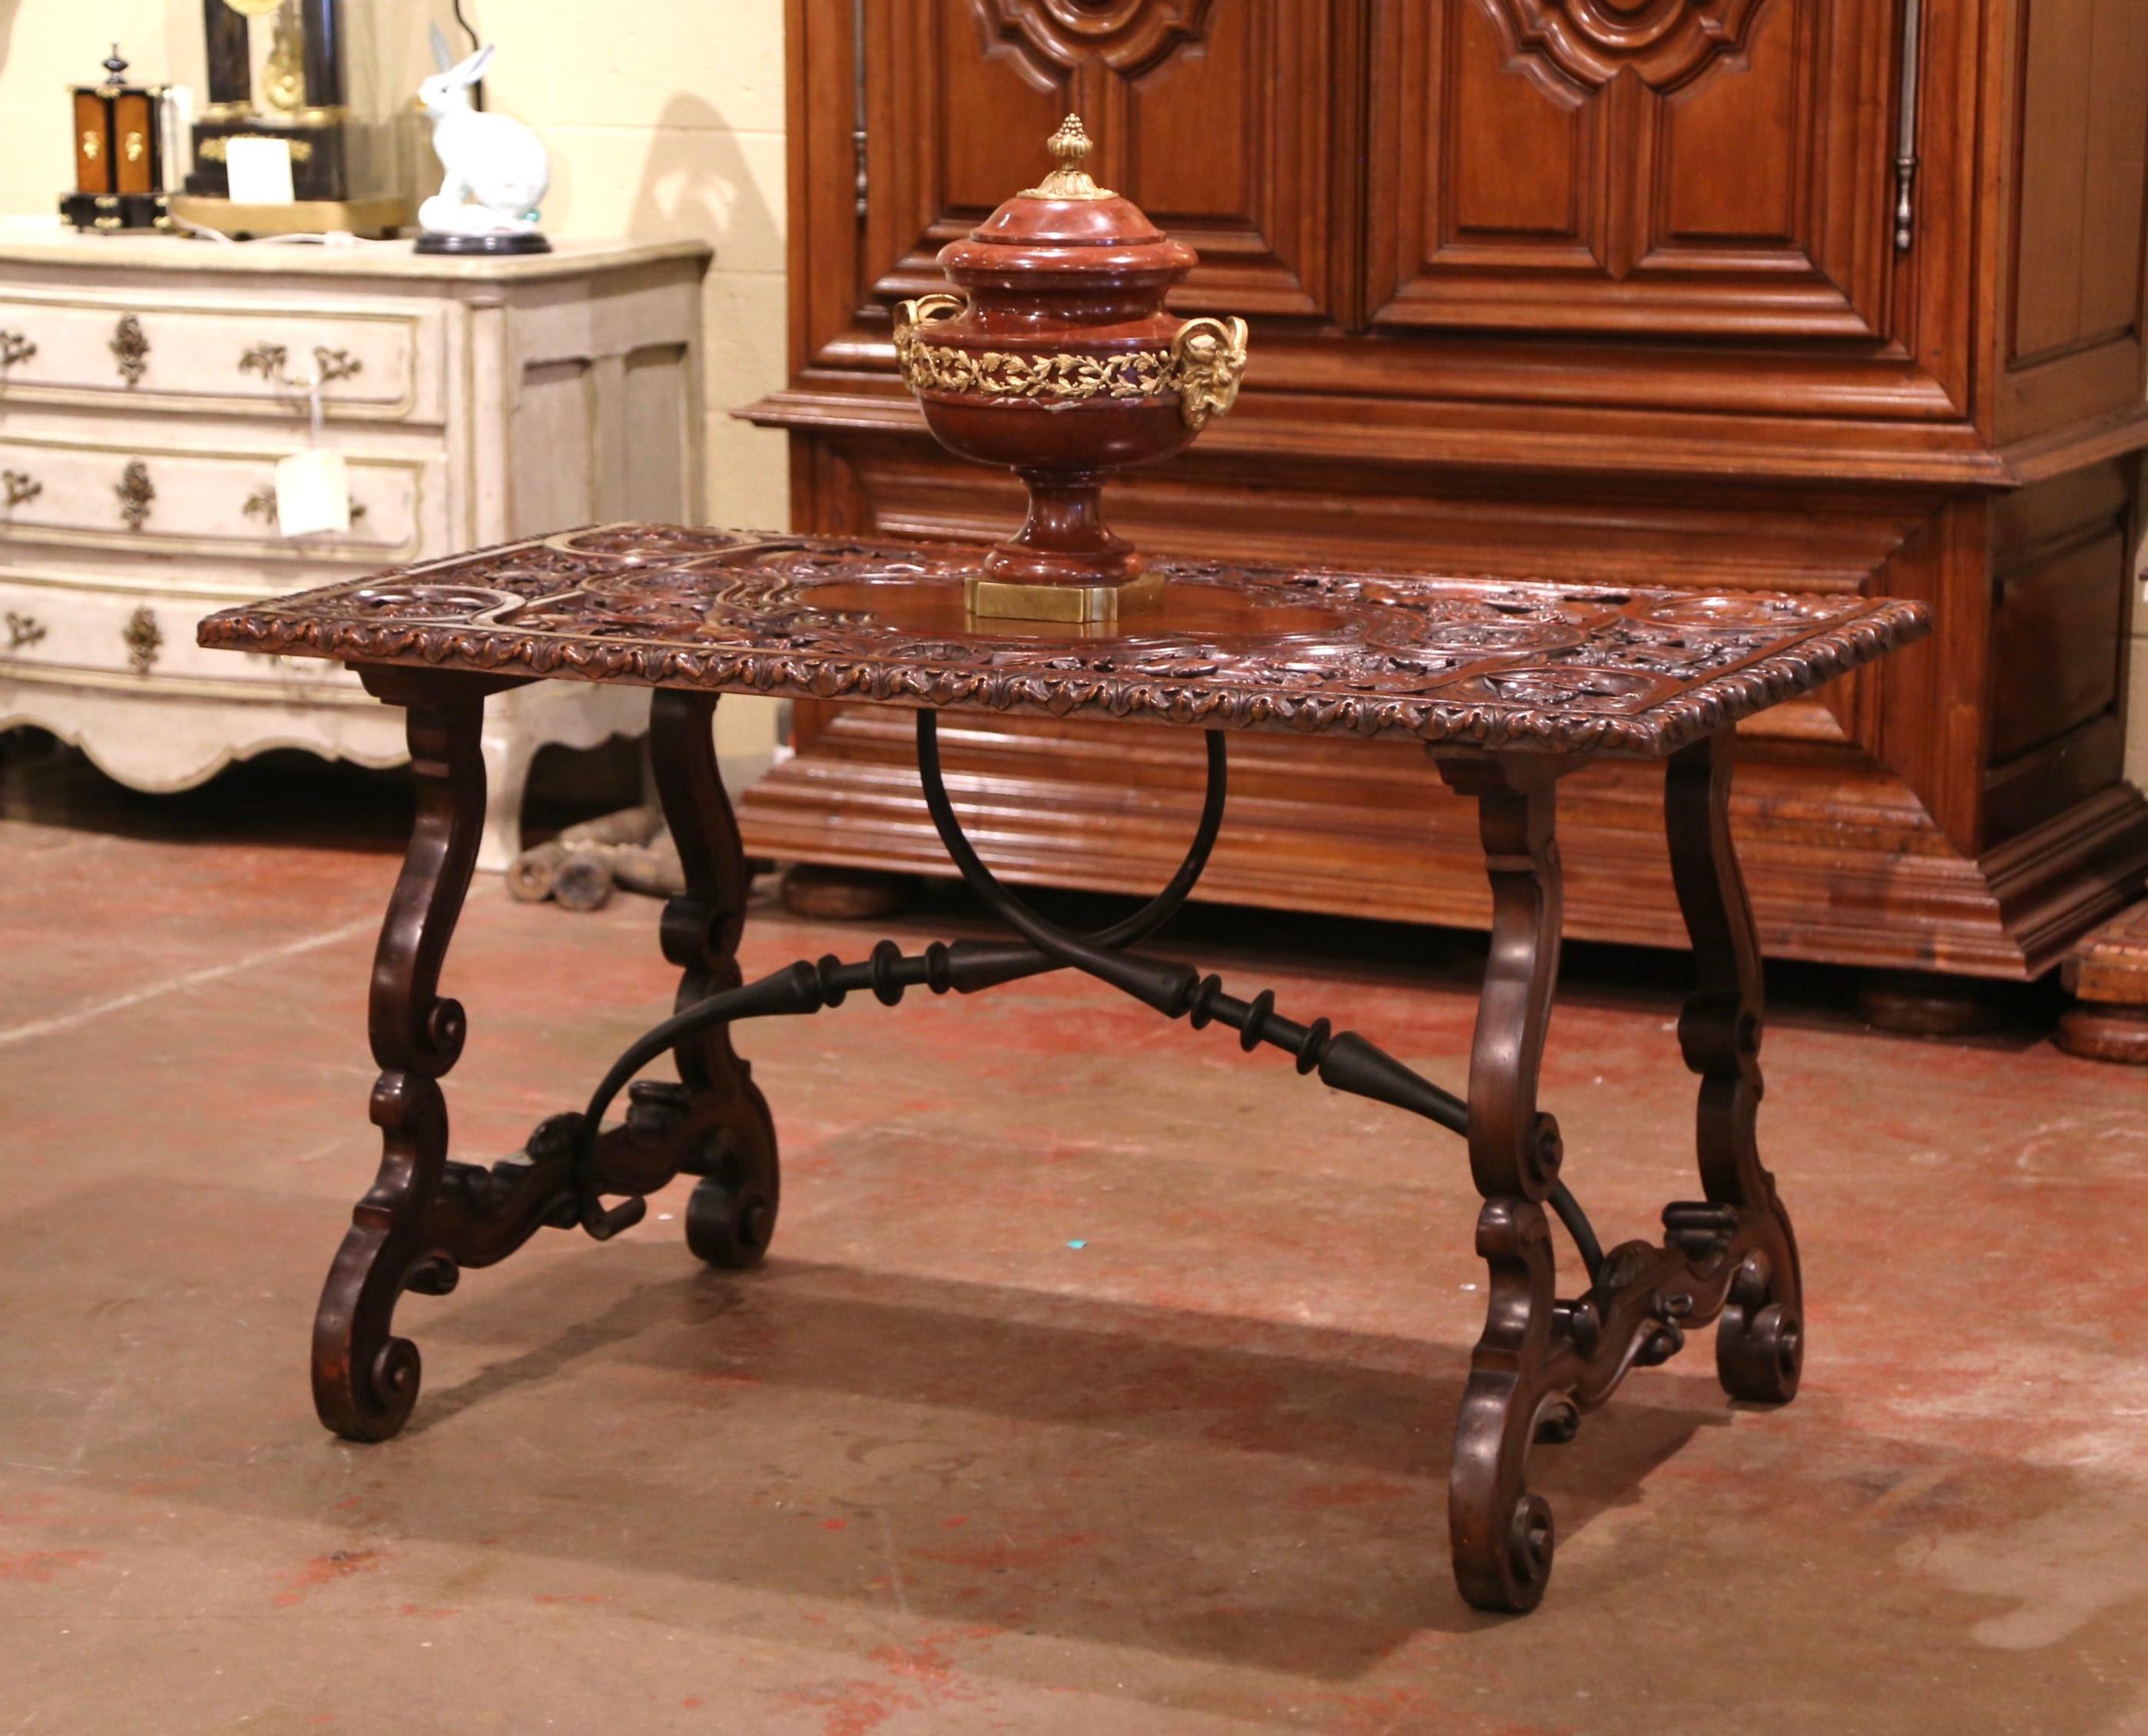 Decorate an entry with this elegant and richly sculpted table. Crafted in Spain circa 1840, the antique table stands on two carved legs connected with two thick forged iron stretchers. The table top features high relief hand carved motifs all over